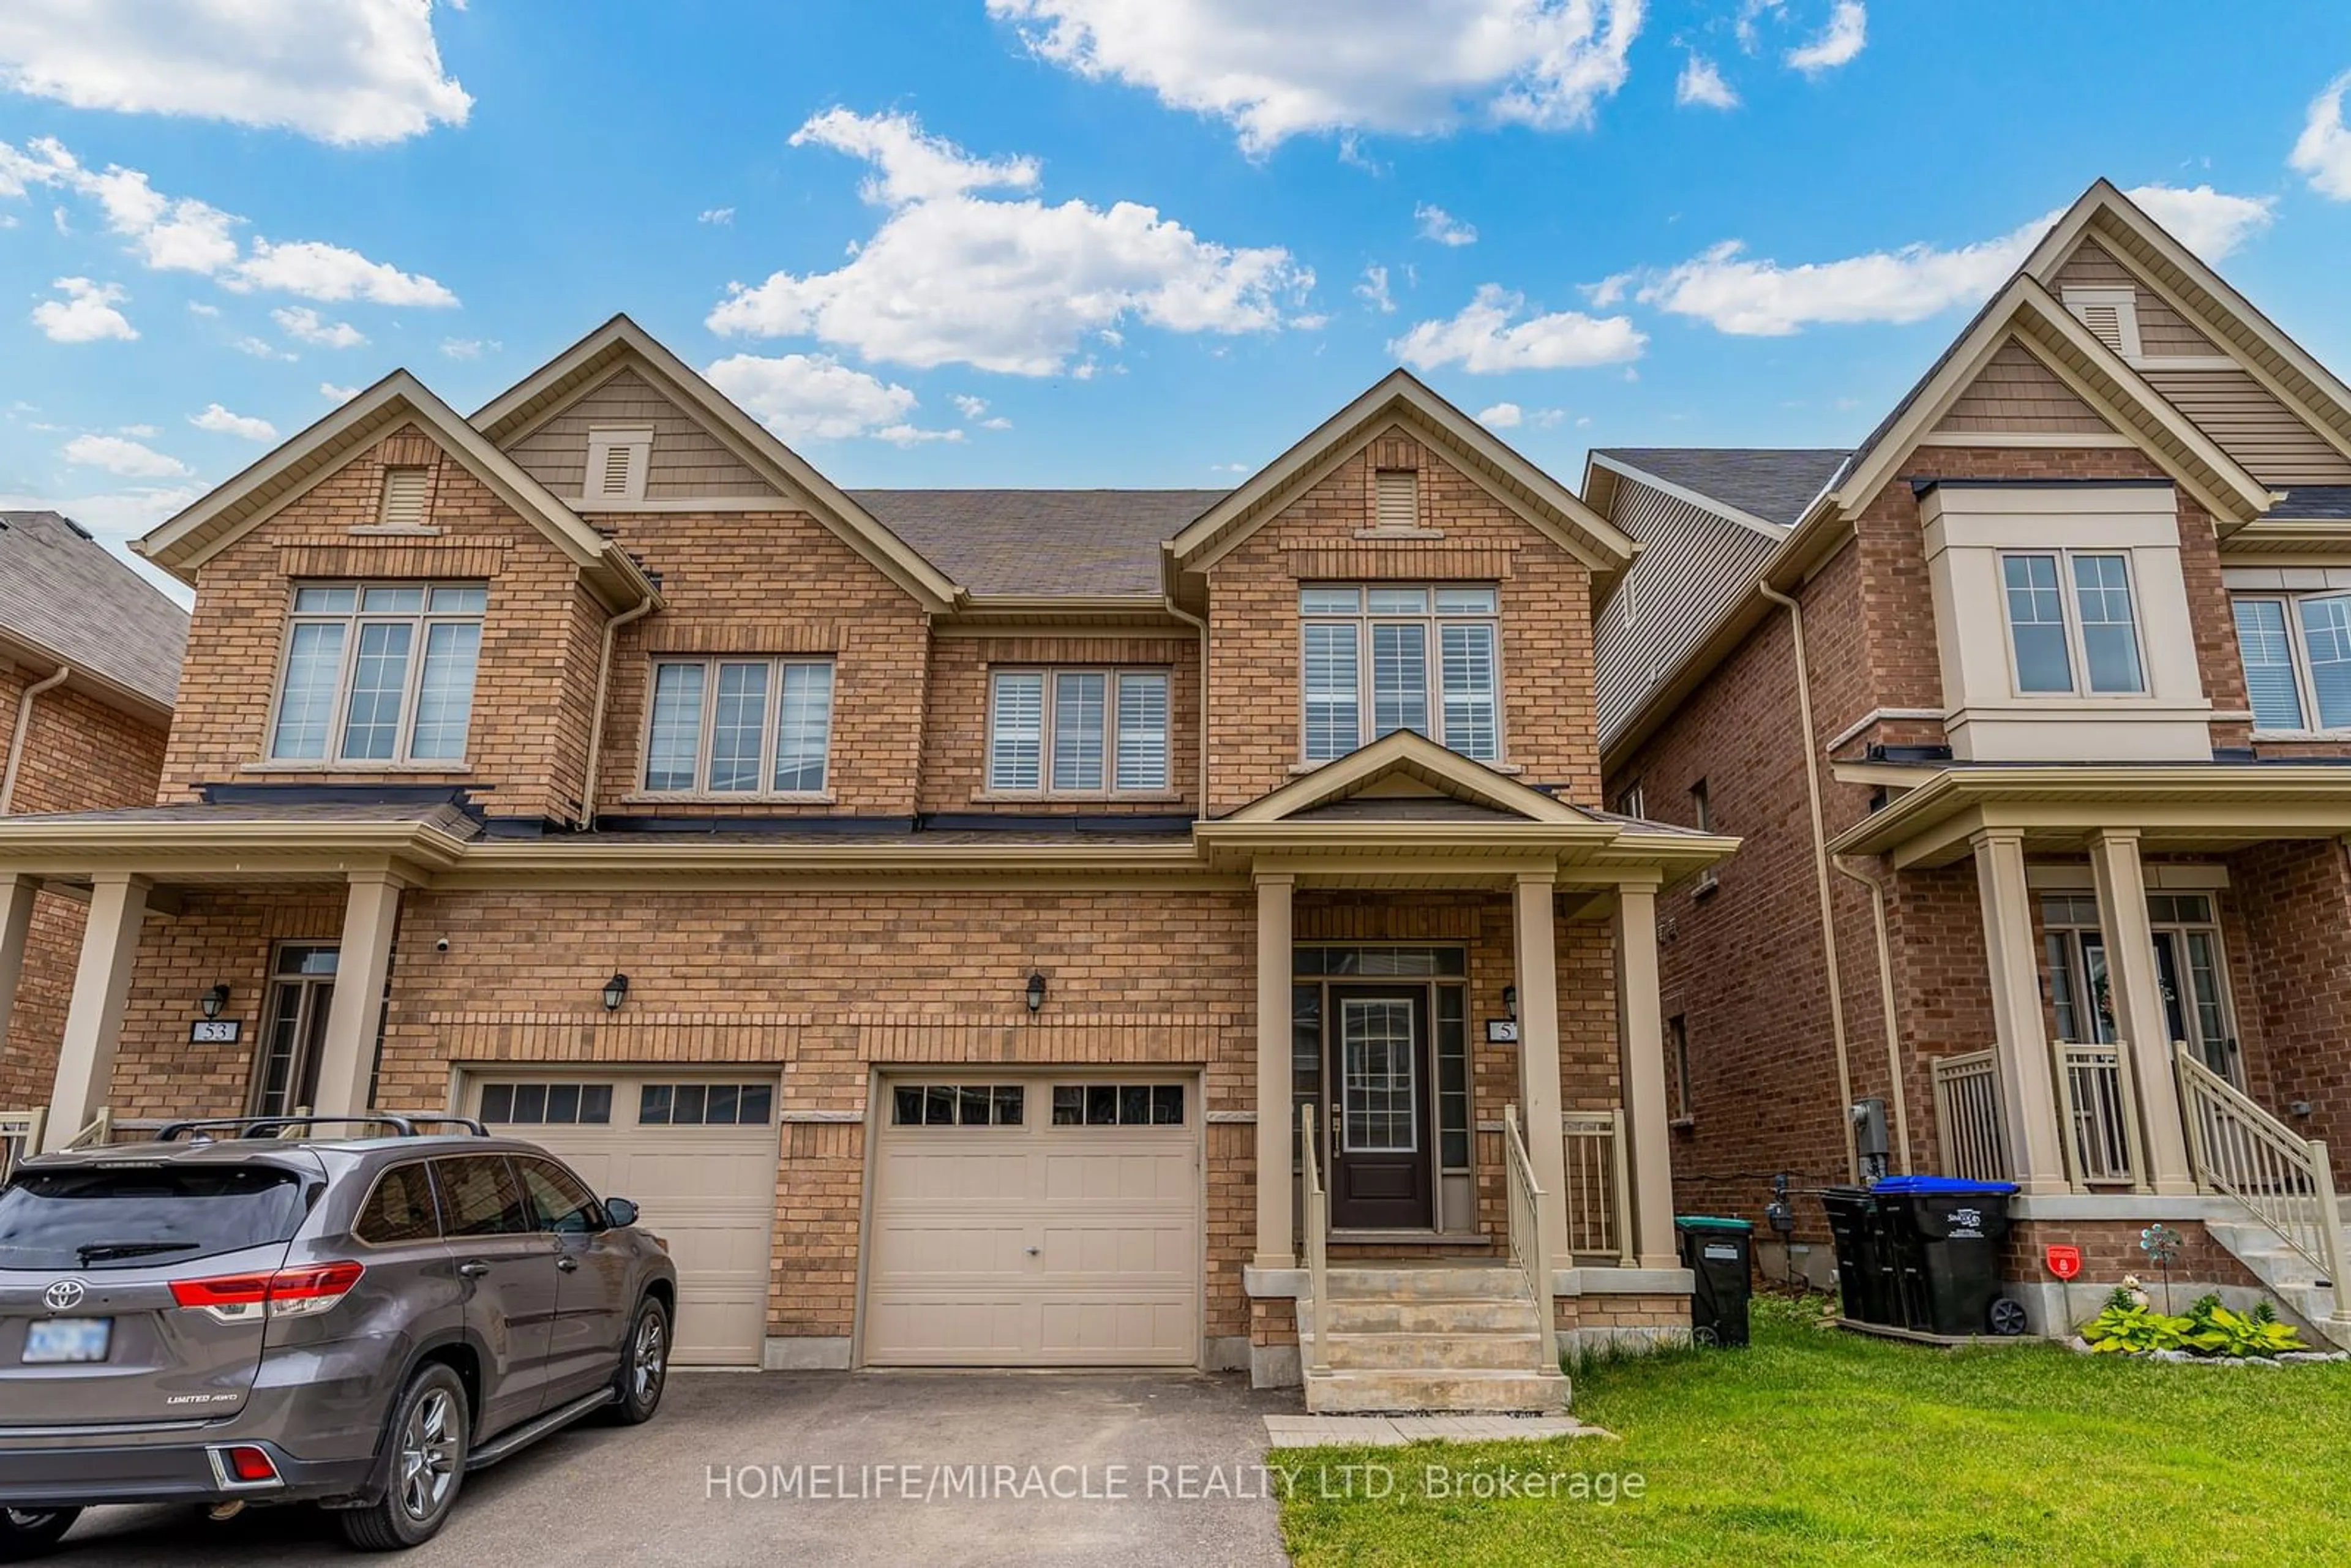 Home with brick exterior material for 51 Casserley Cres, New Tecumseth Ontario L0G 1W0